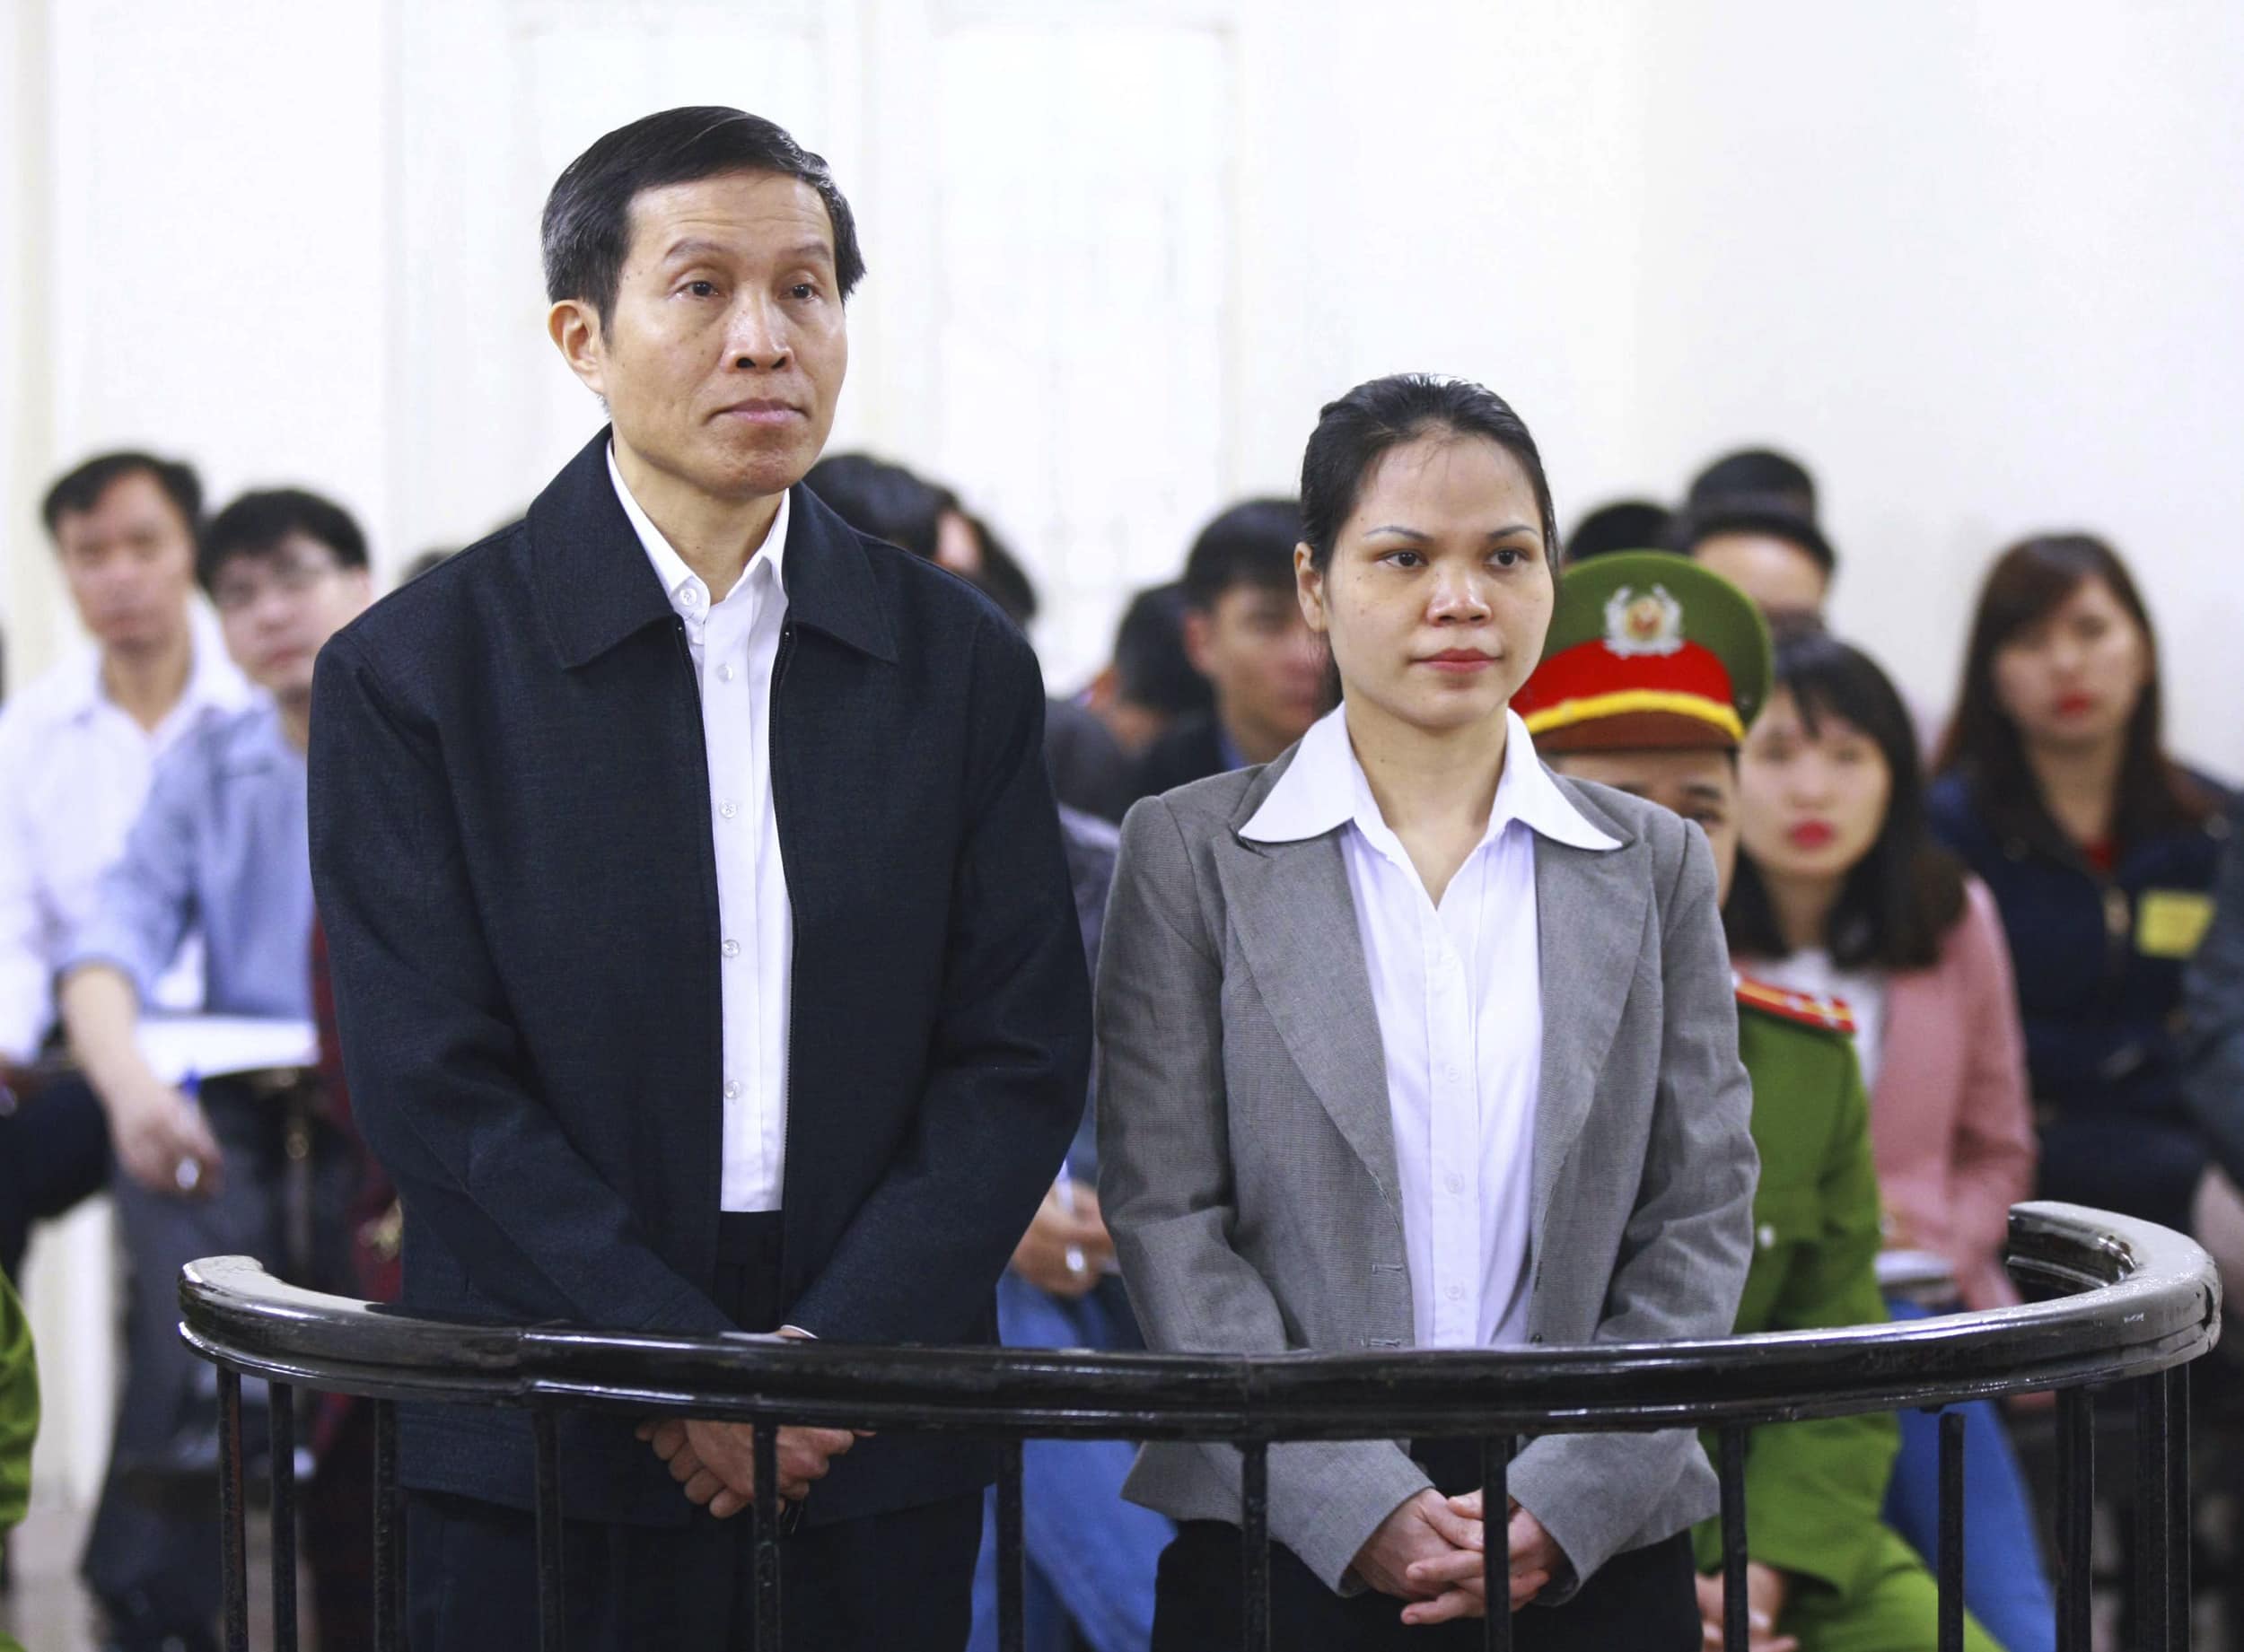 Prominent Vietnamese blogger Nguyen Huu Vinh, left, and his assistant Nguyen Thi Minh Thuy stand together during a trial in Hanoi, Vietnam, Wednesday, March 23, 2016., AP/Bui Doan Tan